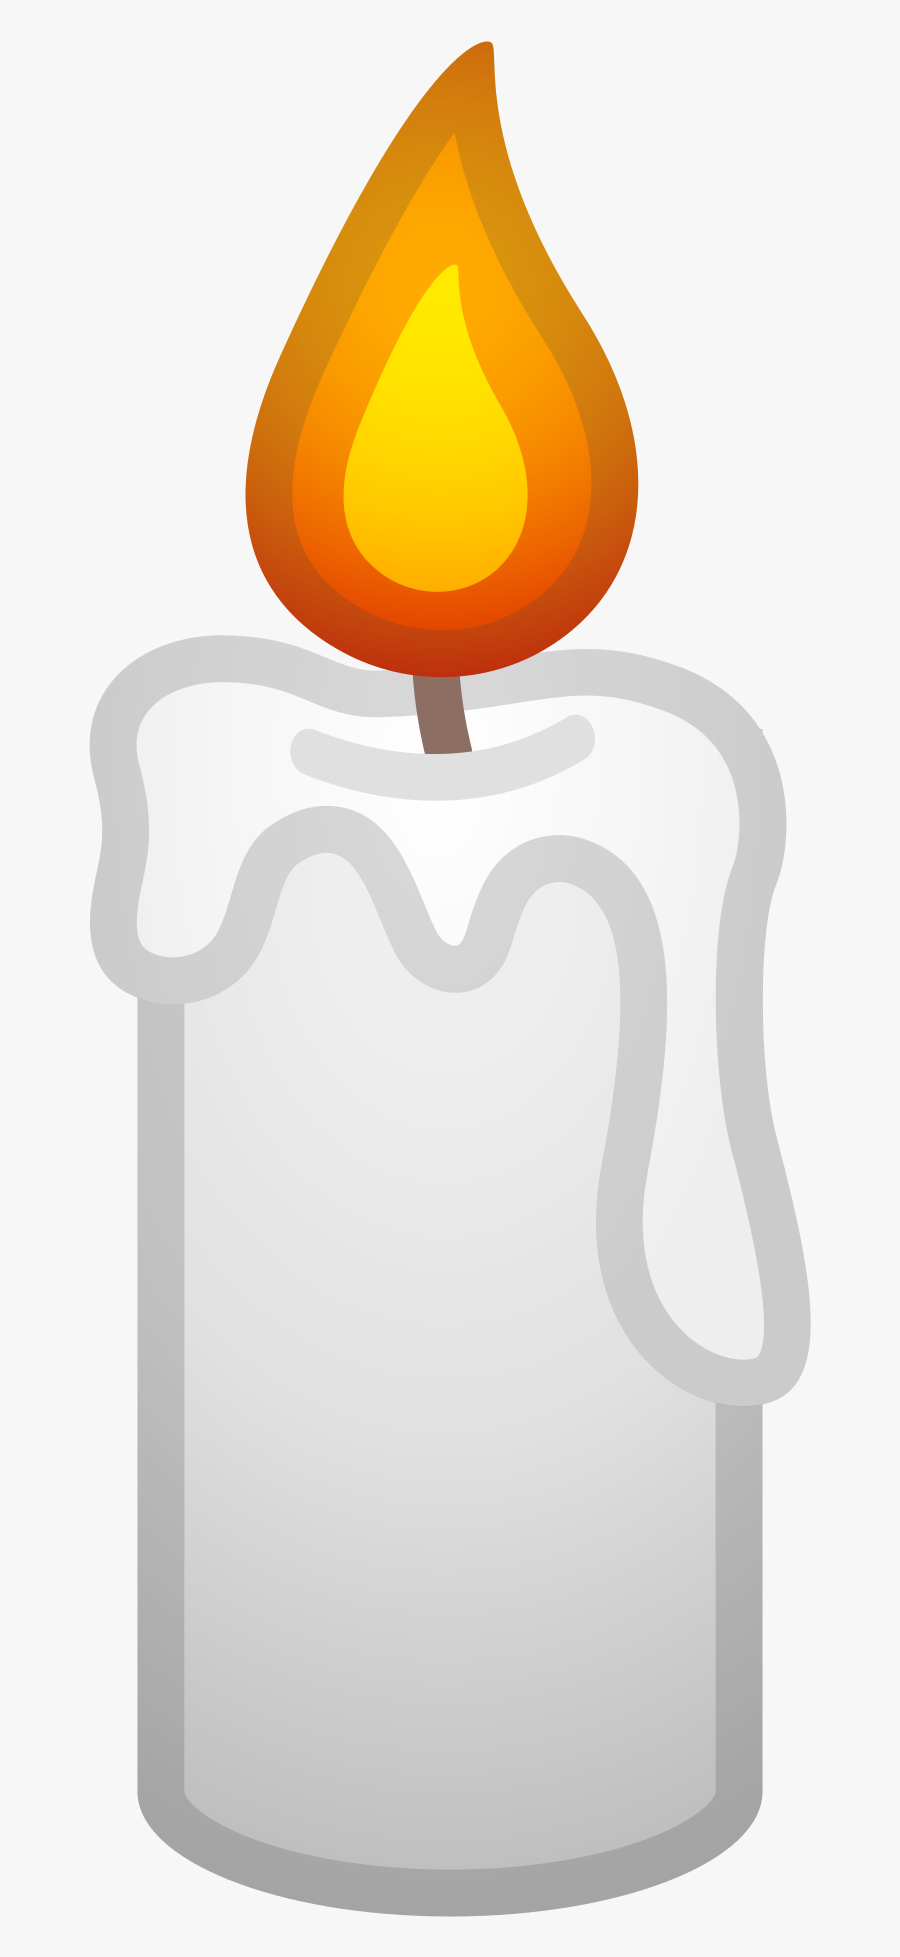 Android Candle Emoji, Transparent Clipart